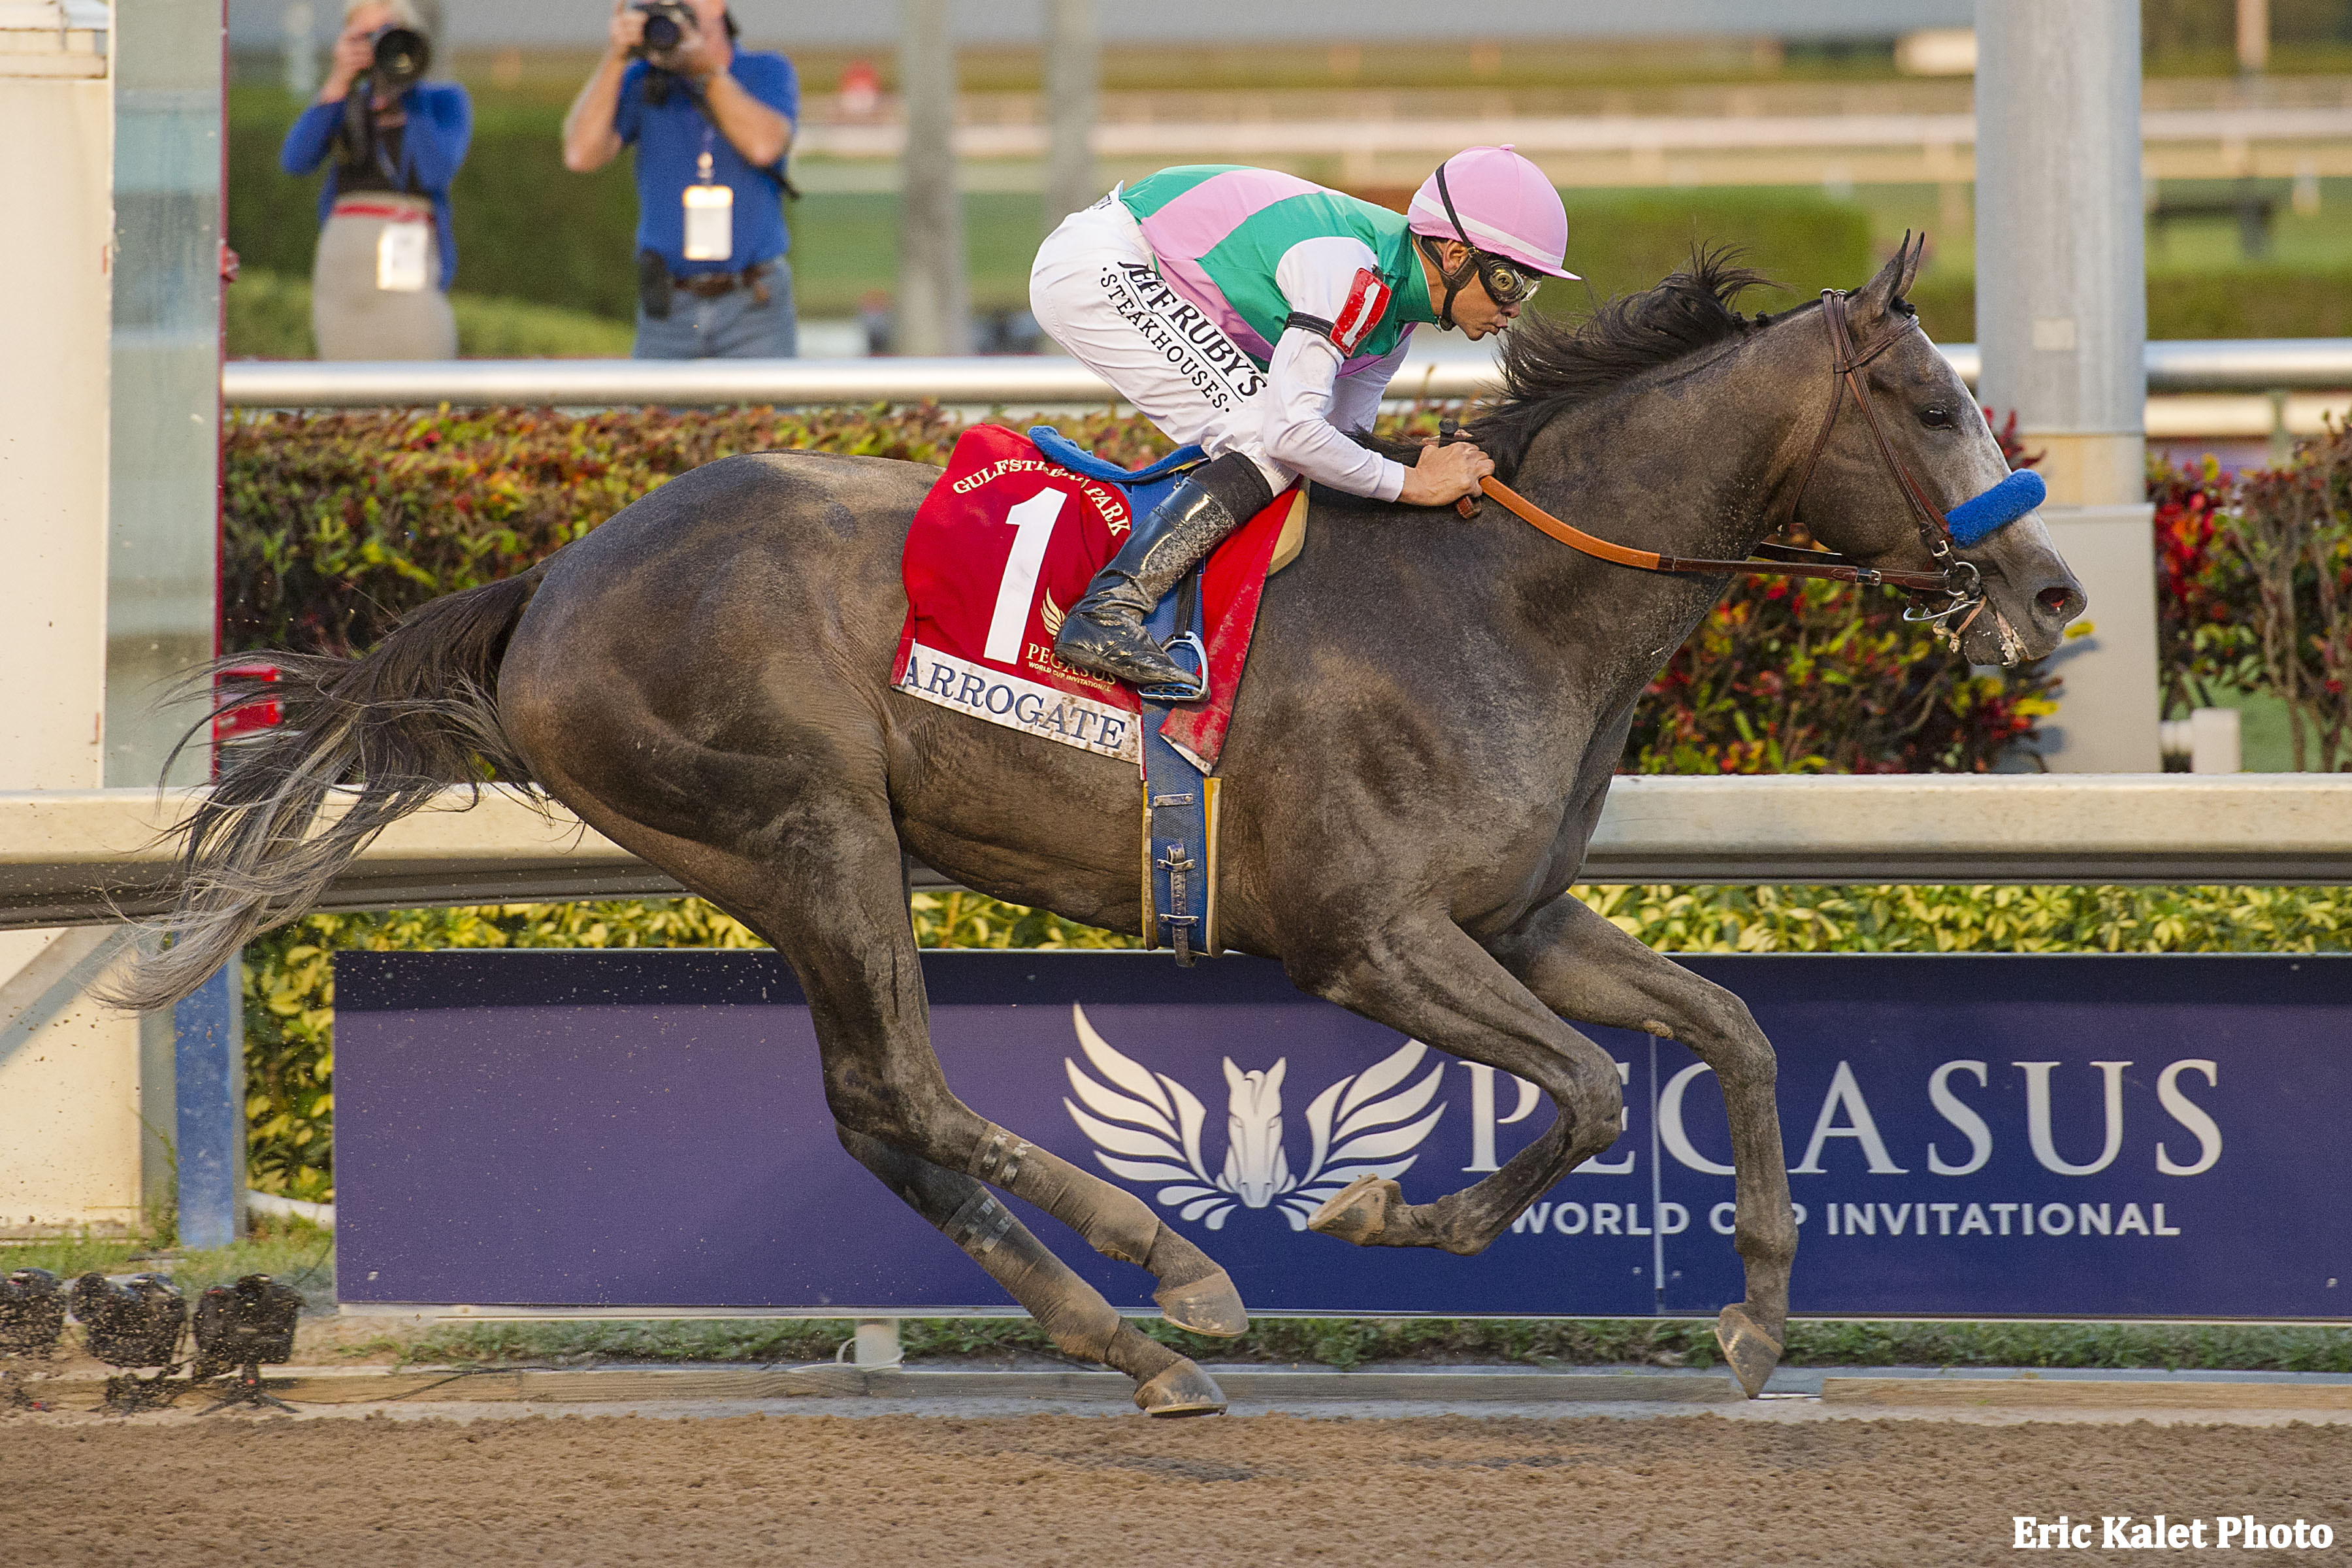 Arrogate and jockey Mike Smith win the 2017 Pegasus World Cup Invitational at Gulfstream Park. Photo courtesy of Eric Kalet.